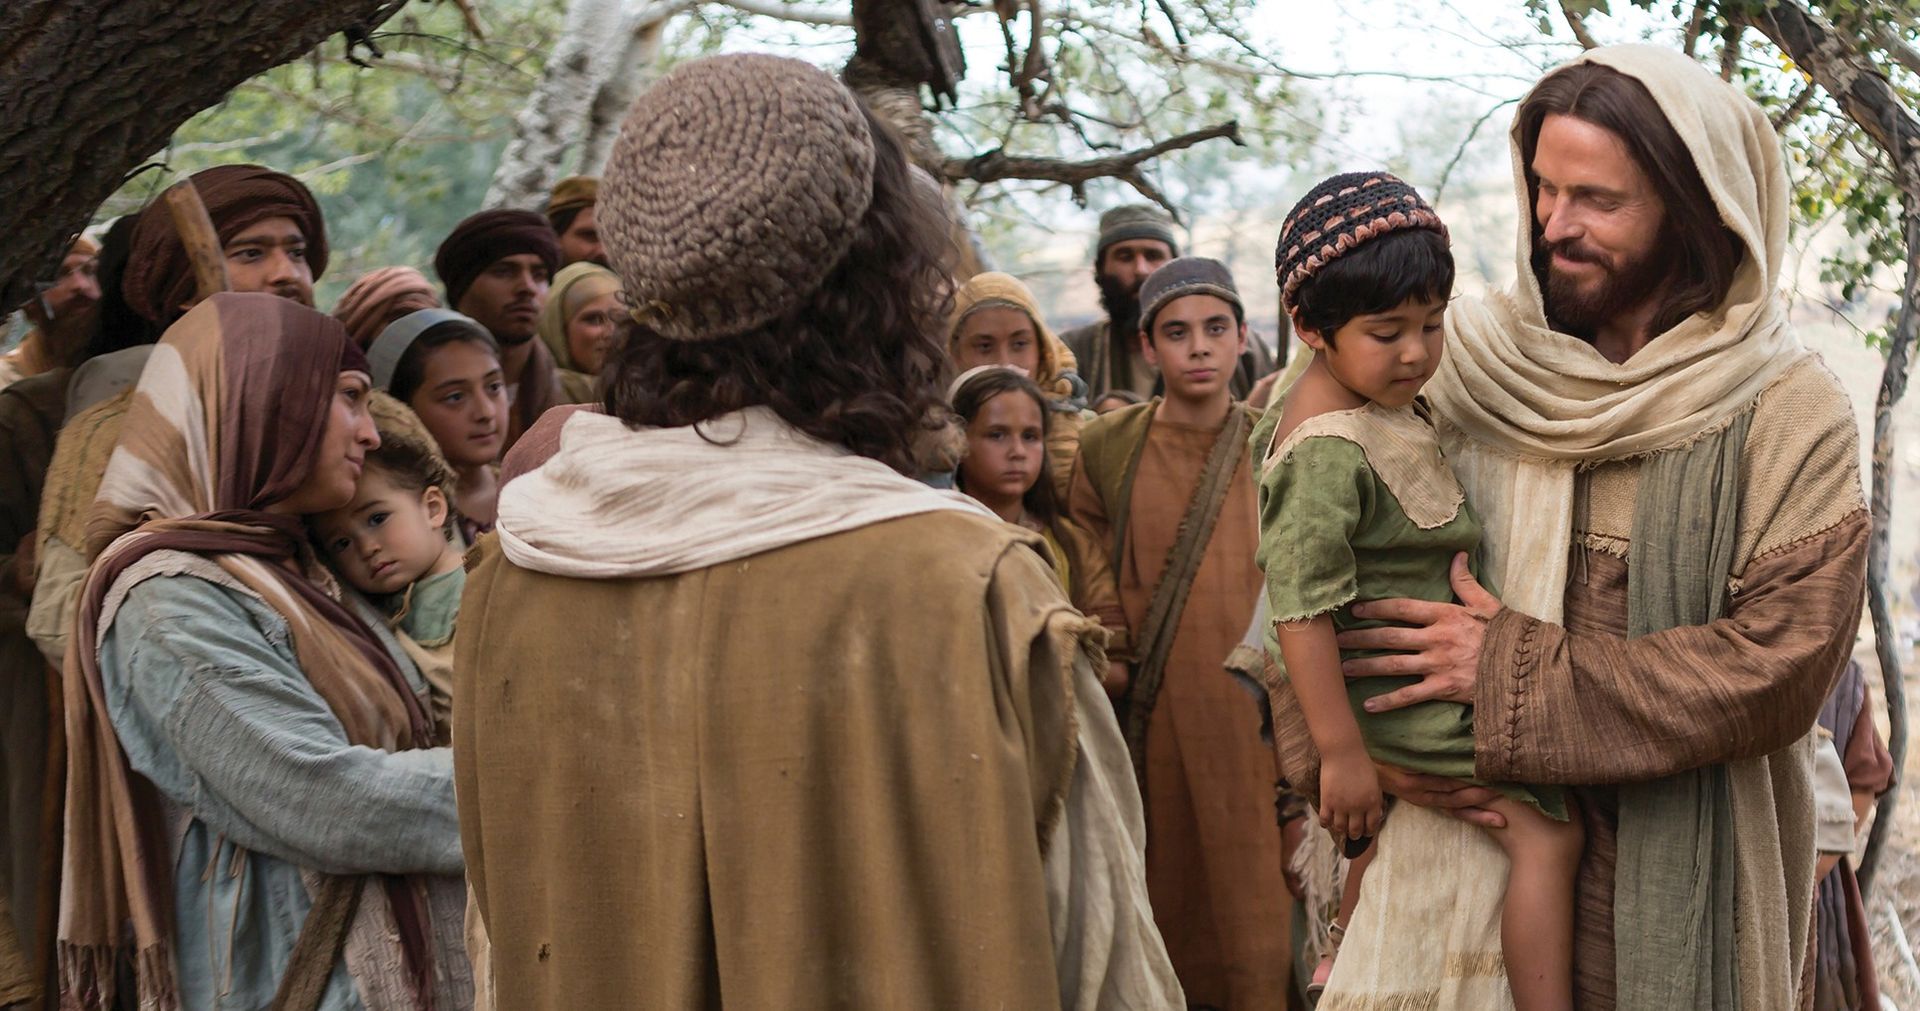 Jesus is sitting down on the ground with a young boy in his lap and surrounded by mothers and other people.  Outtakes include Jesus holding children and walking with them, his disciples with him, Jesus and Peter, Jesus with Peter and James and some of the children. Still image from The Life of Christ Bible Videos: The Gospels video.